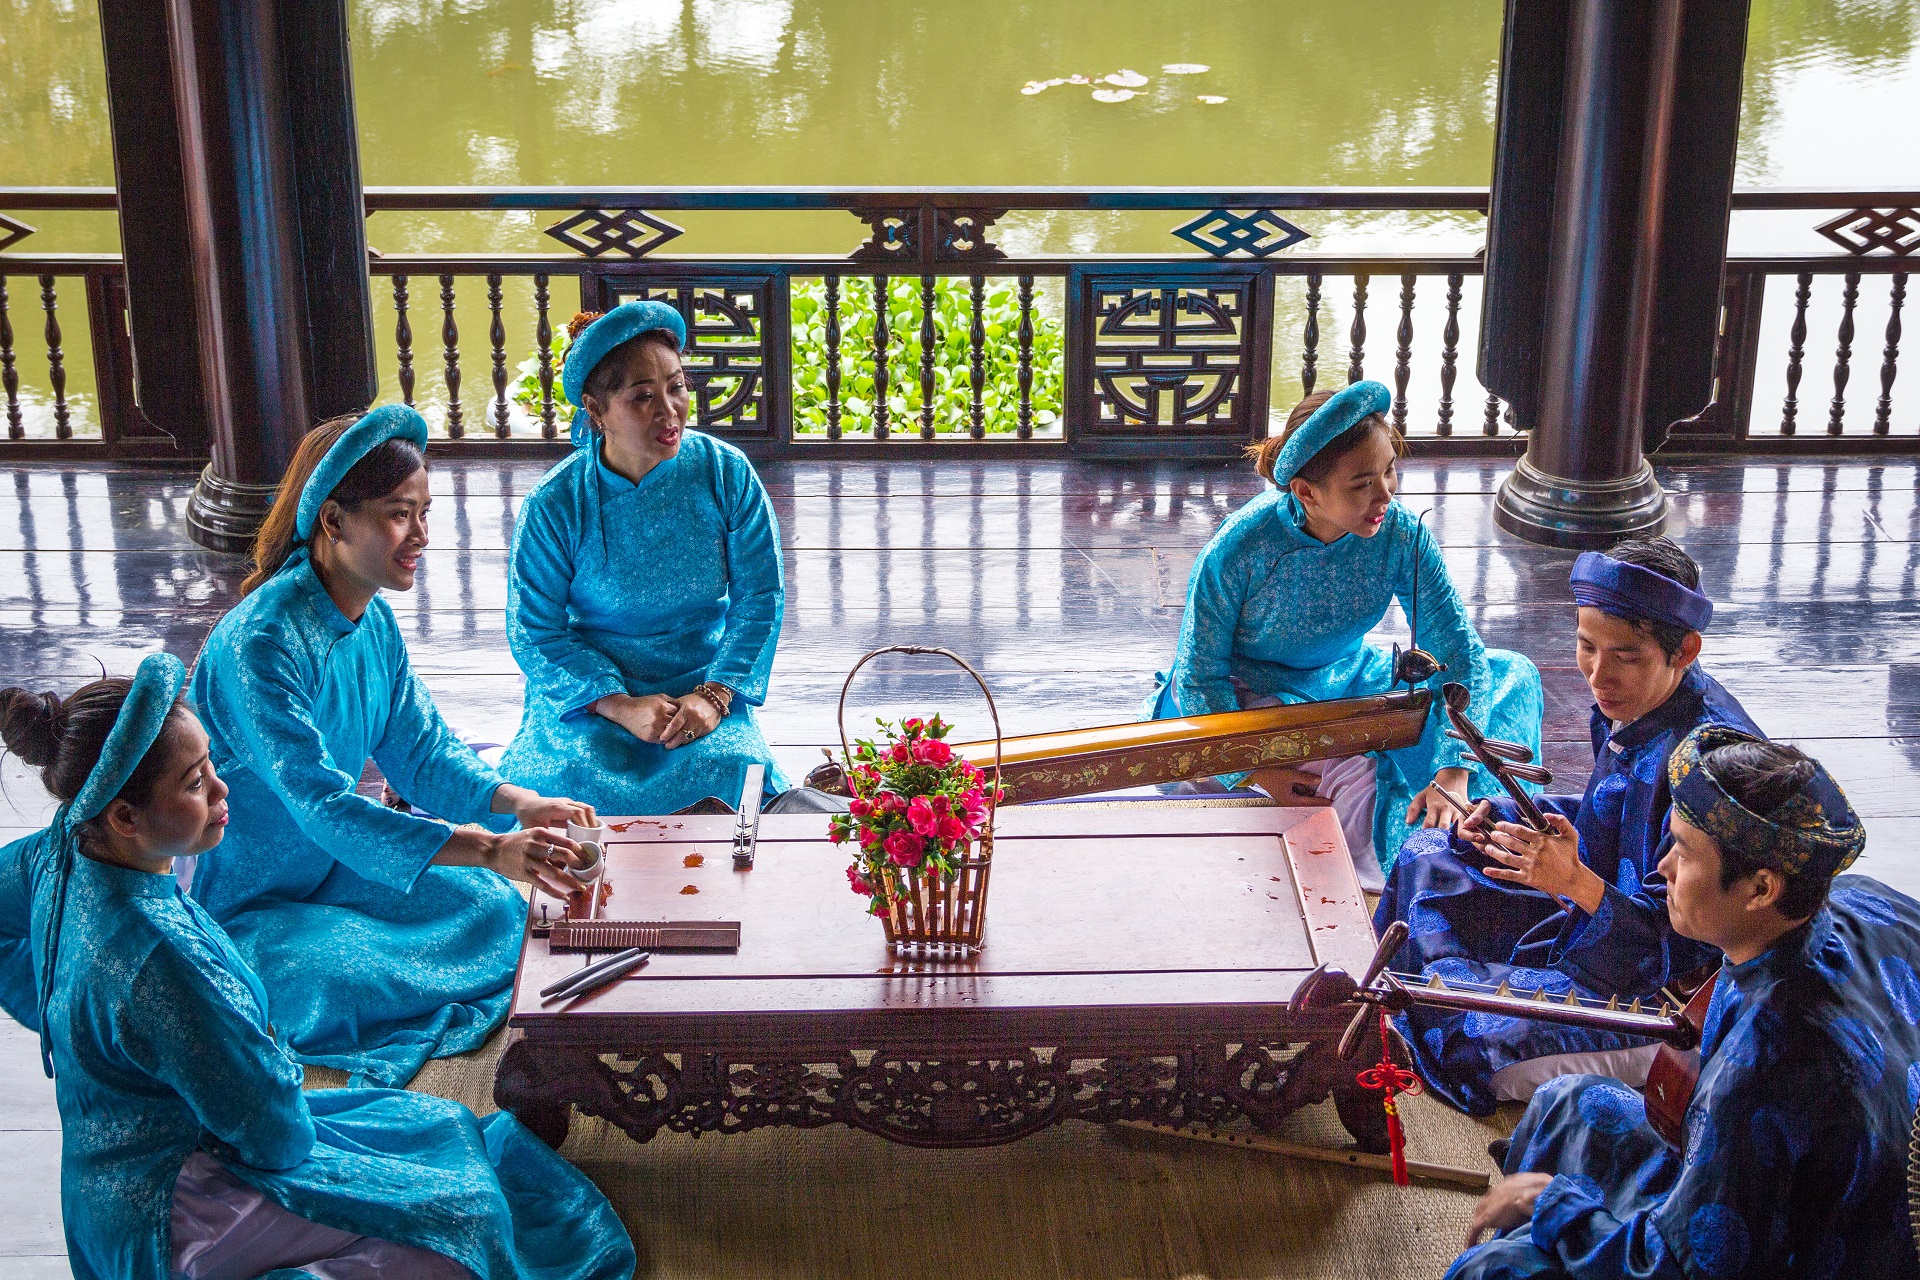 A traditional music performance in Hue